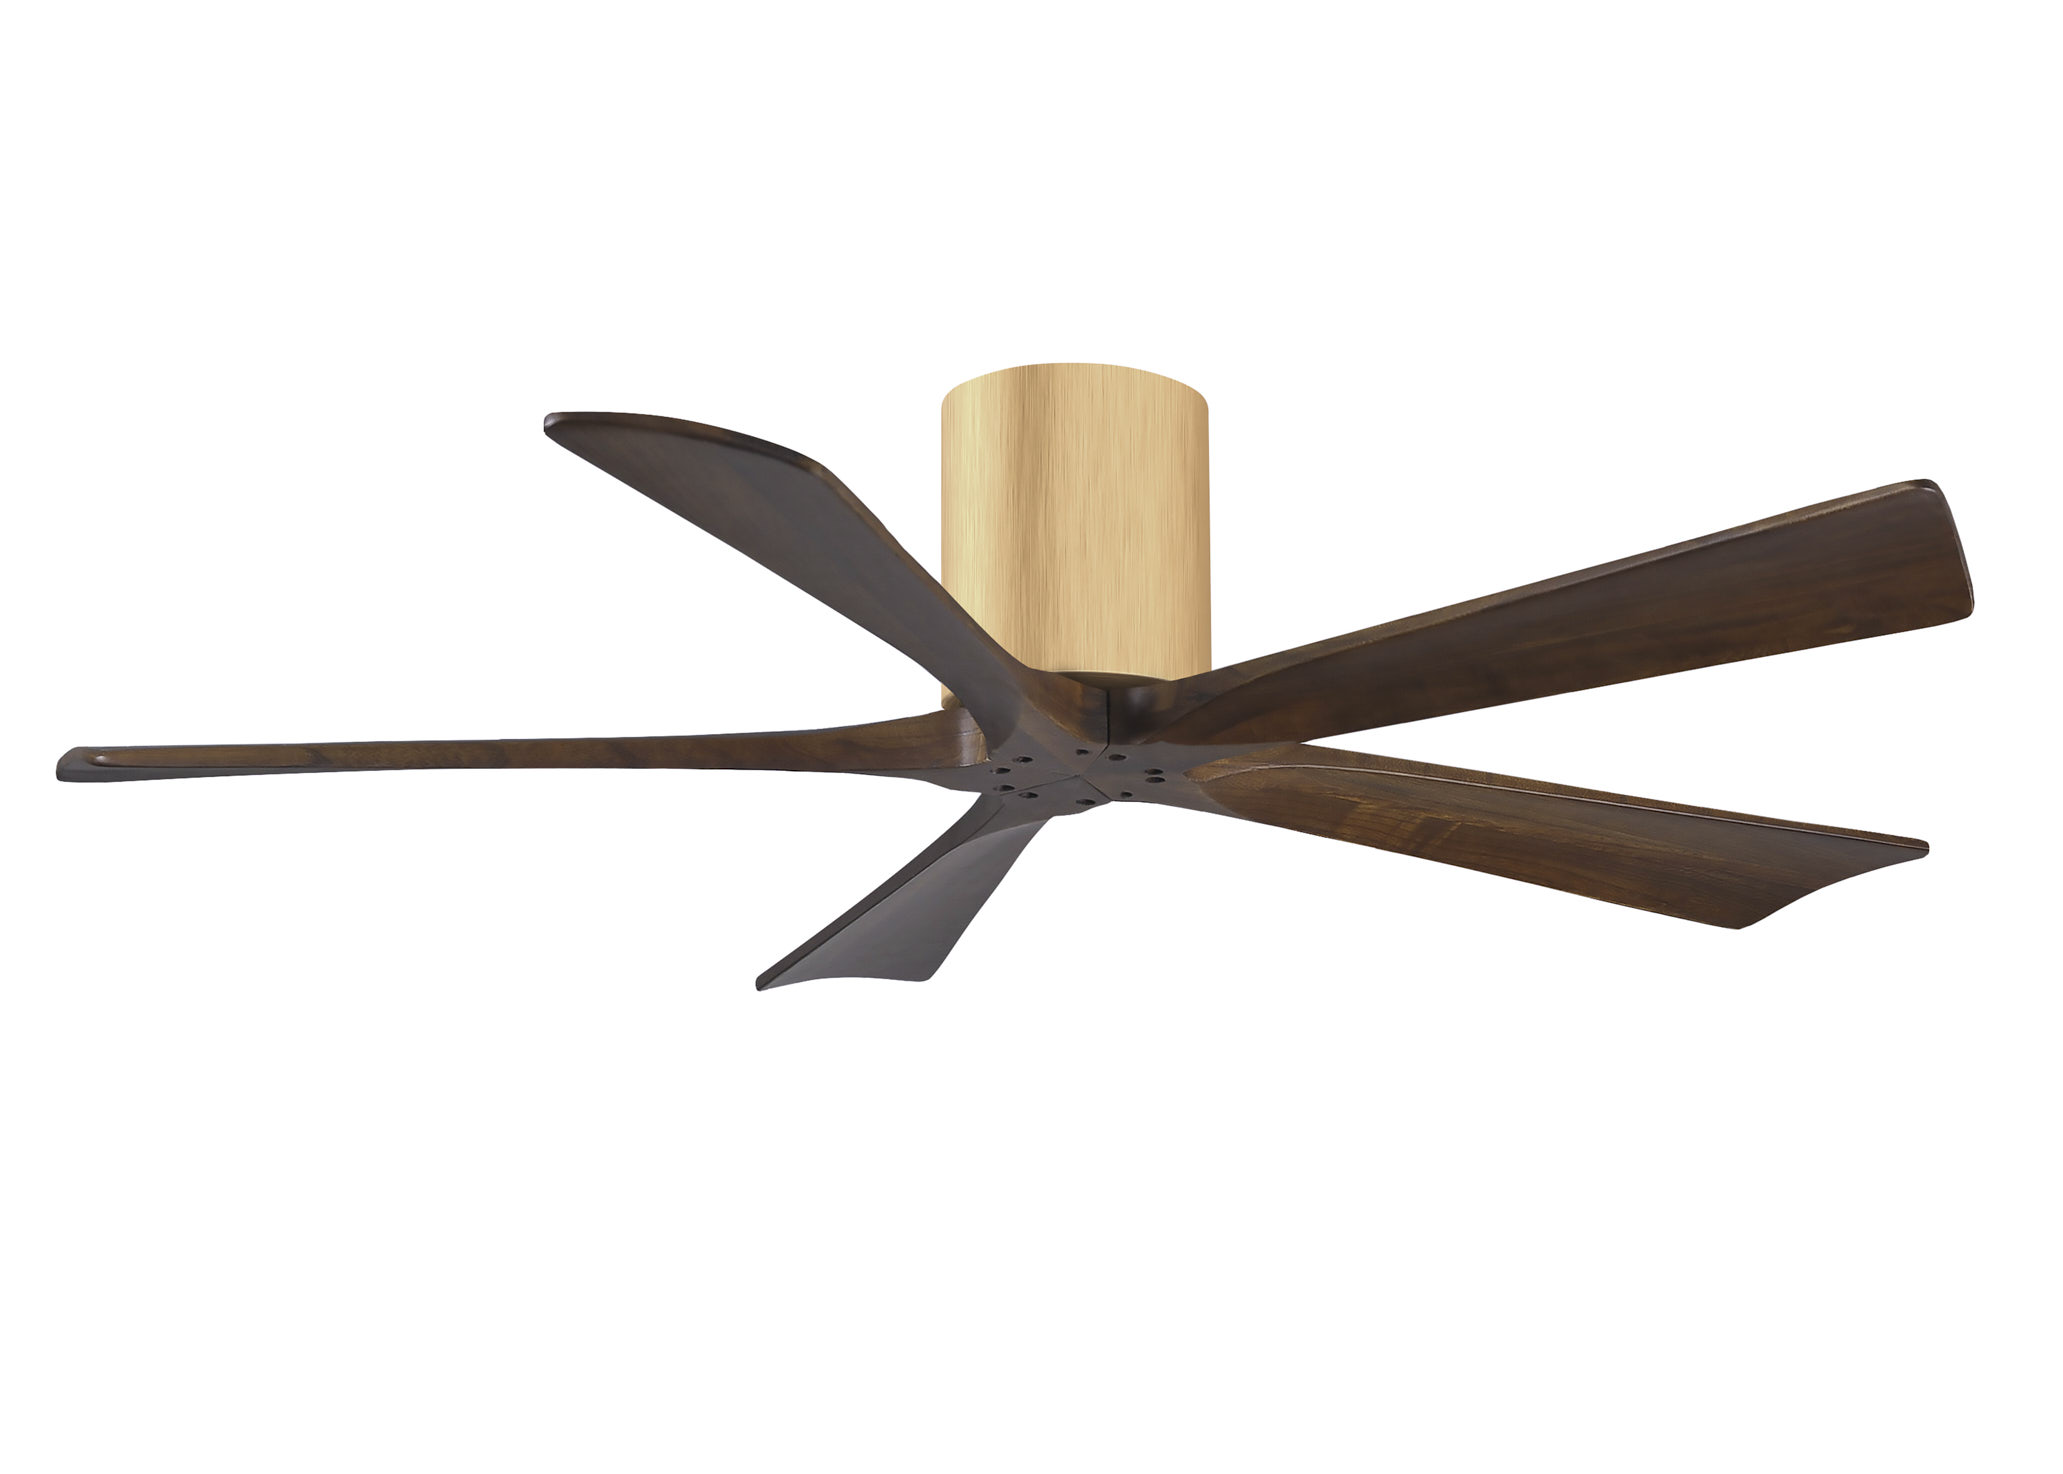 Irene-5H 6-speed ceiling fan in light maple finish with 52